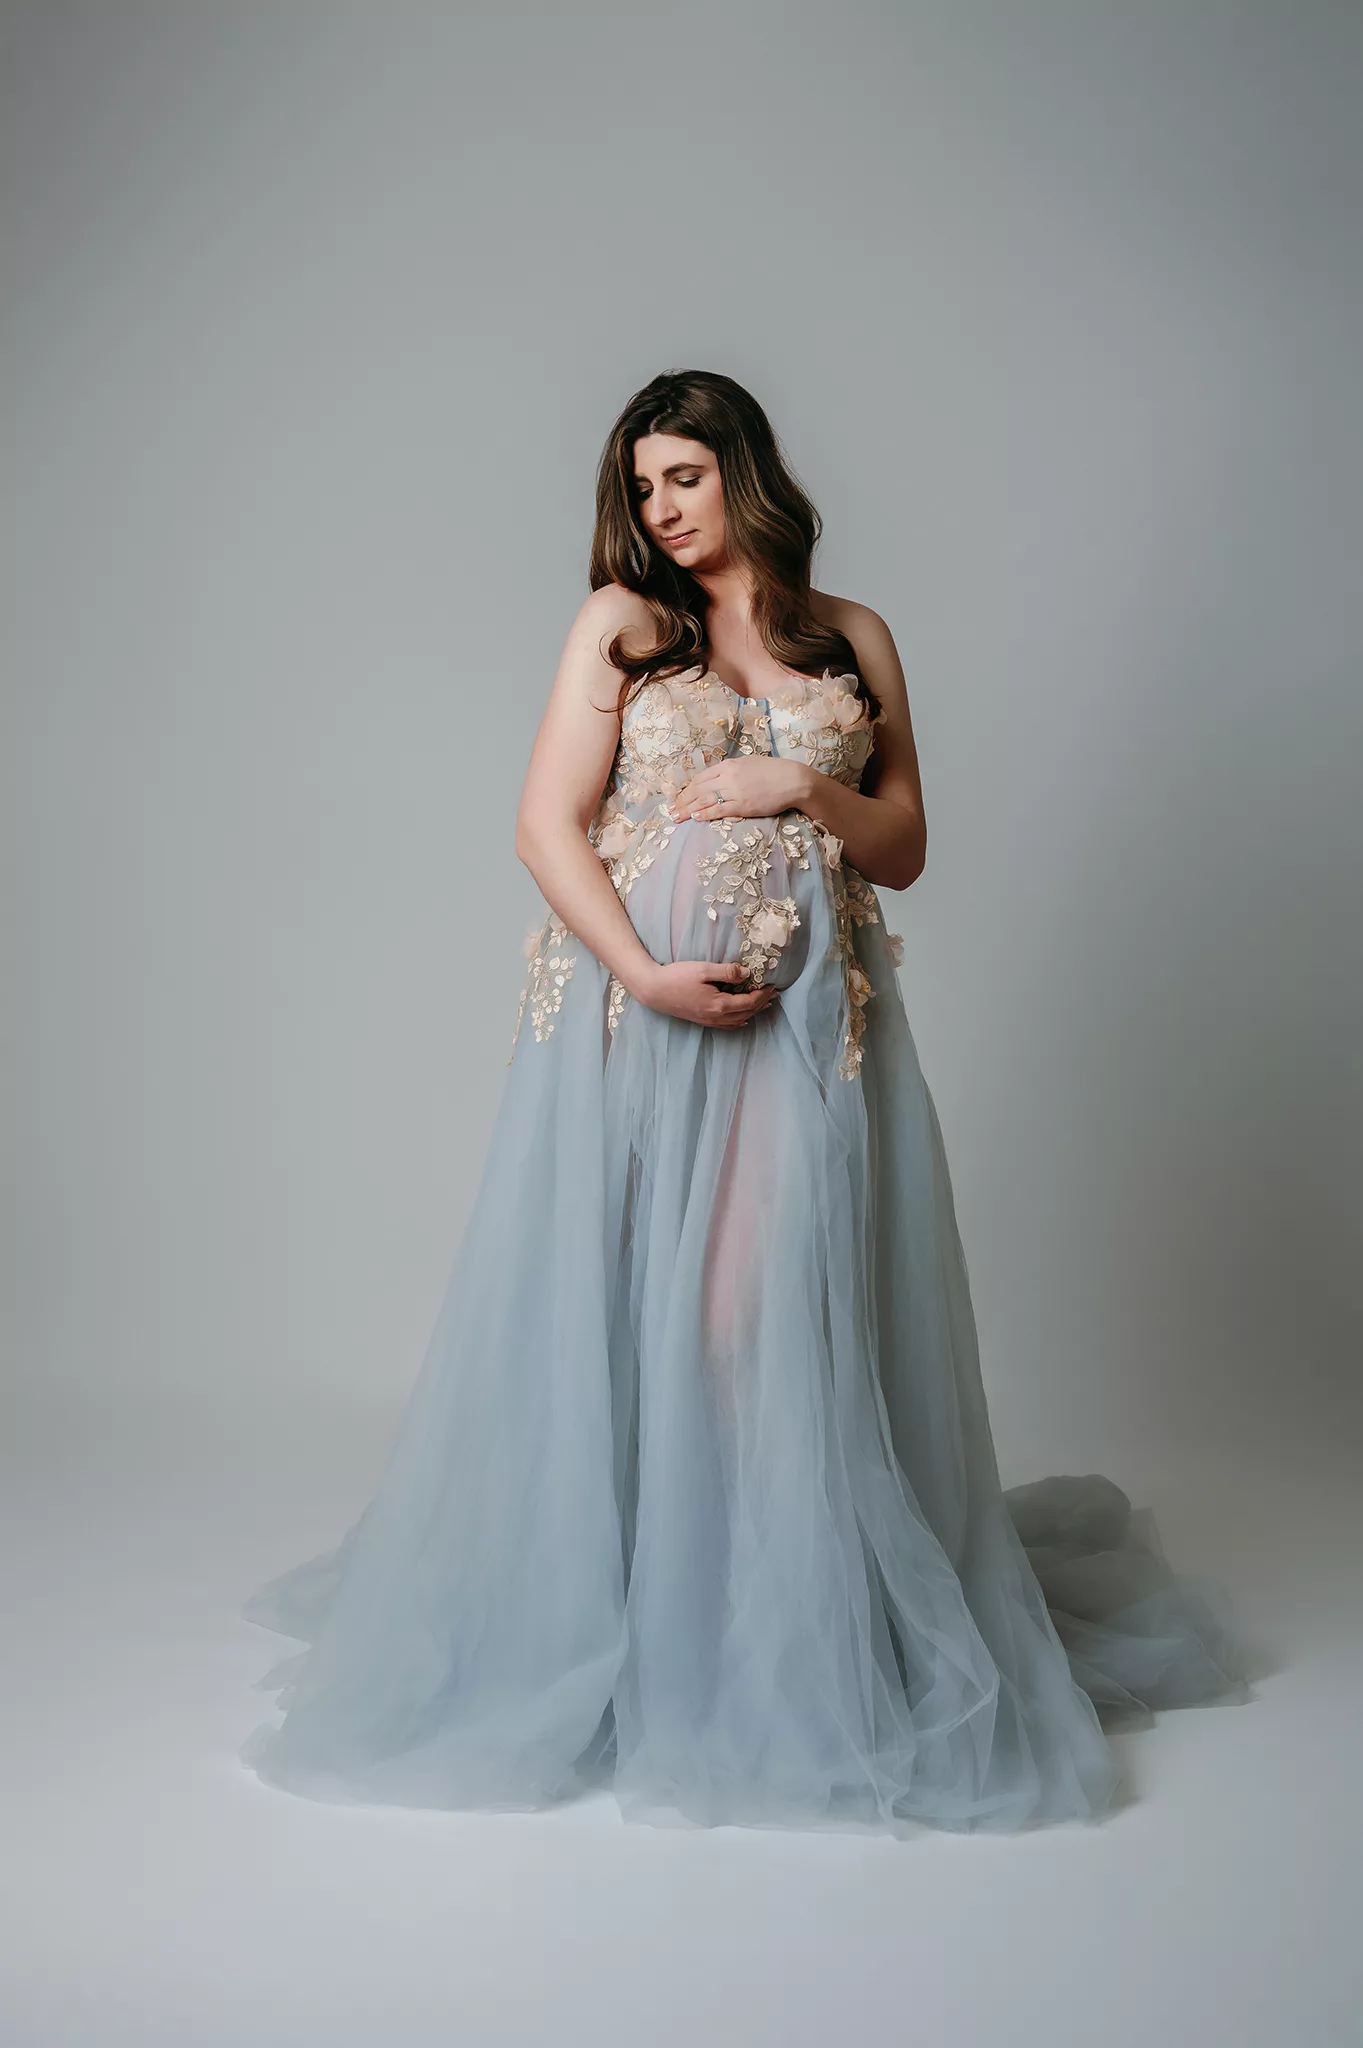 classy pregnancy photo with blue maternity gown